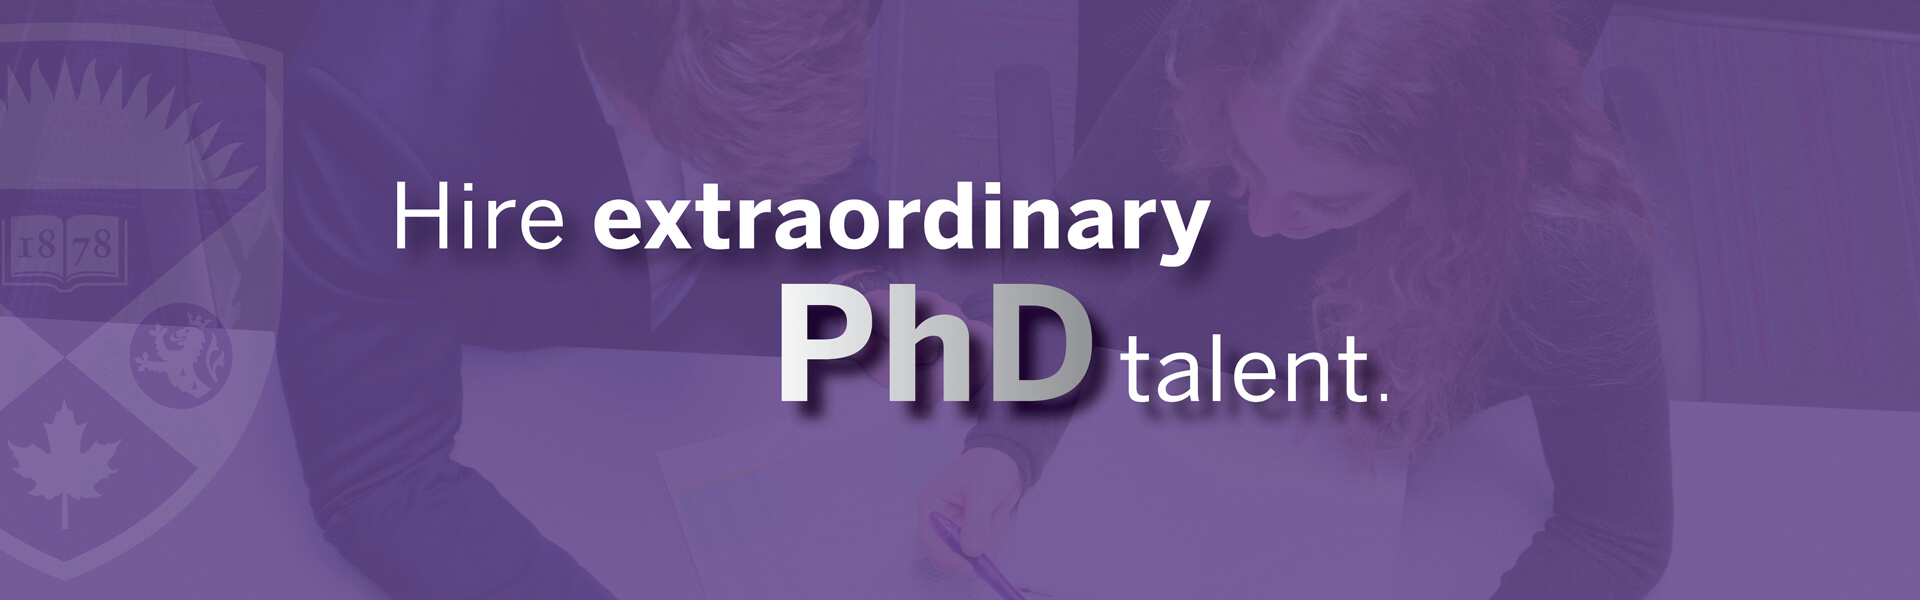 Purple background with silver text reading HIre extraordinary PhD talent